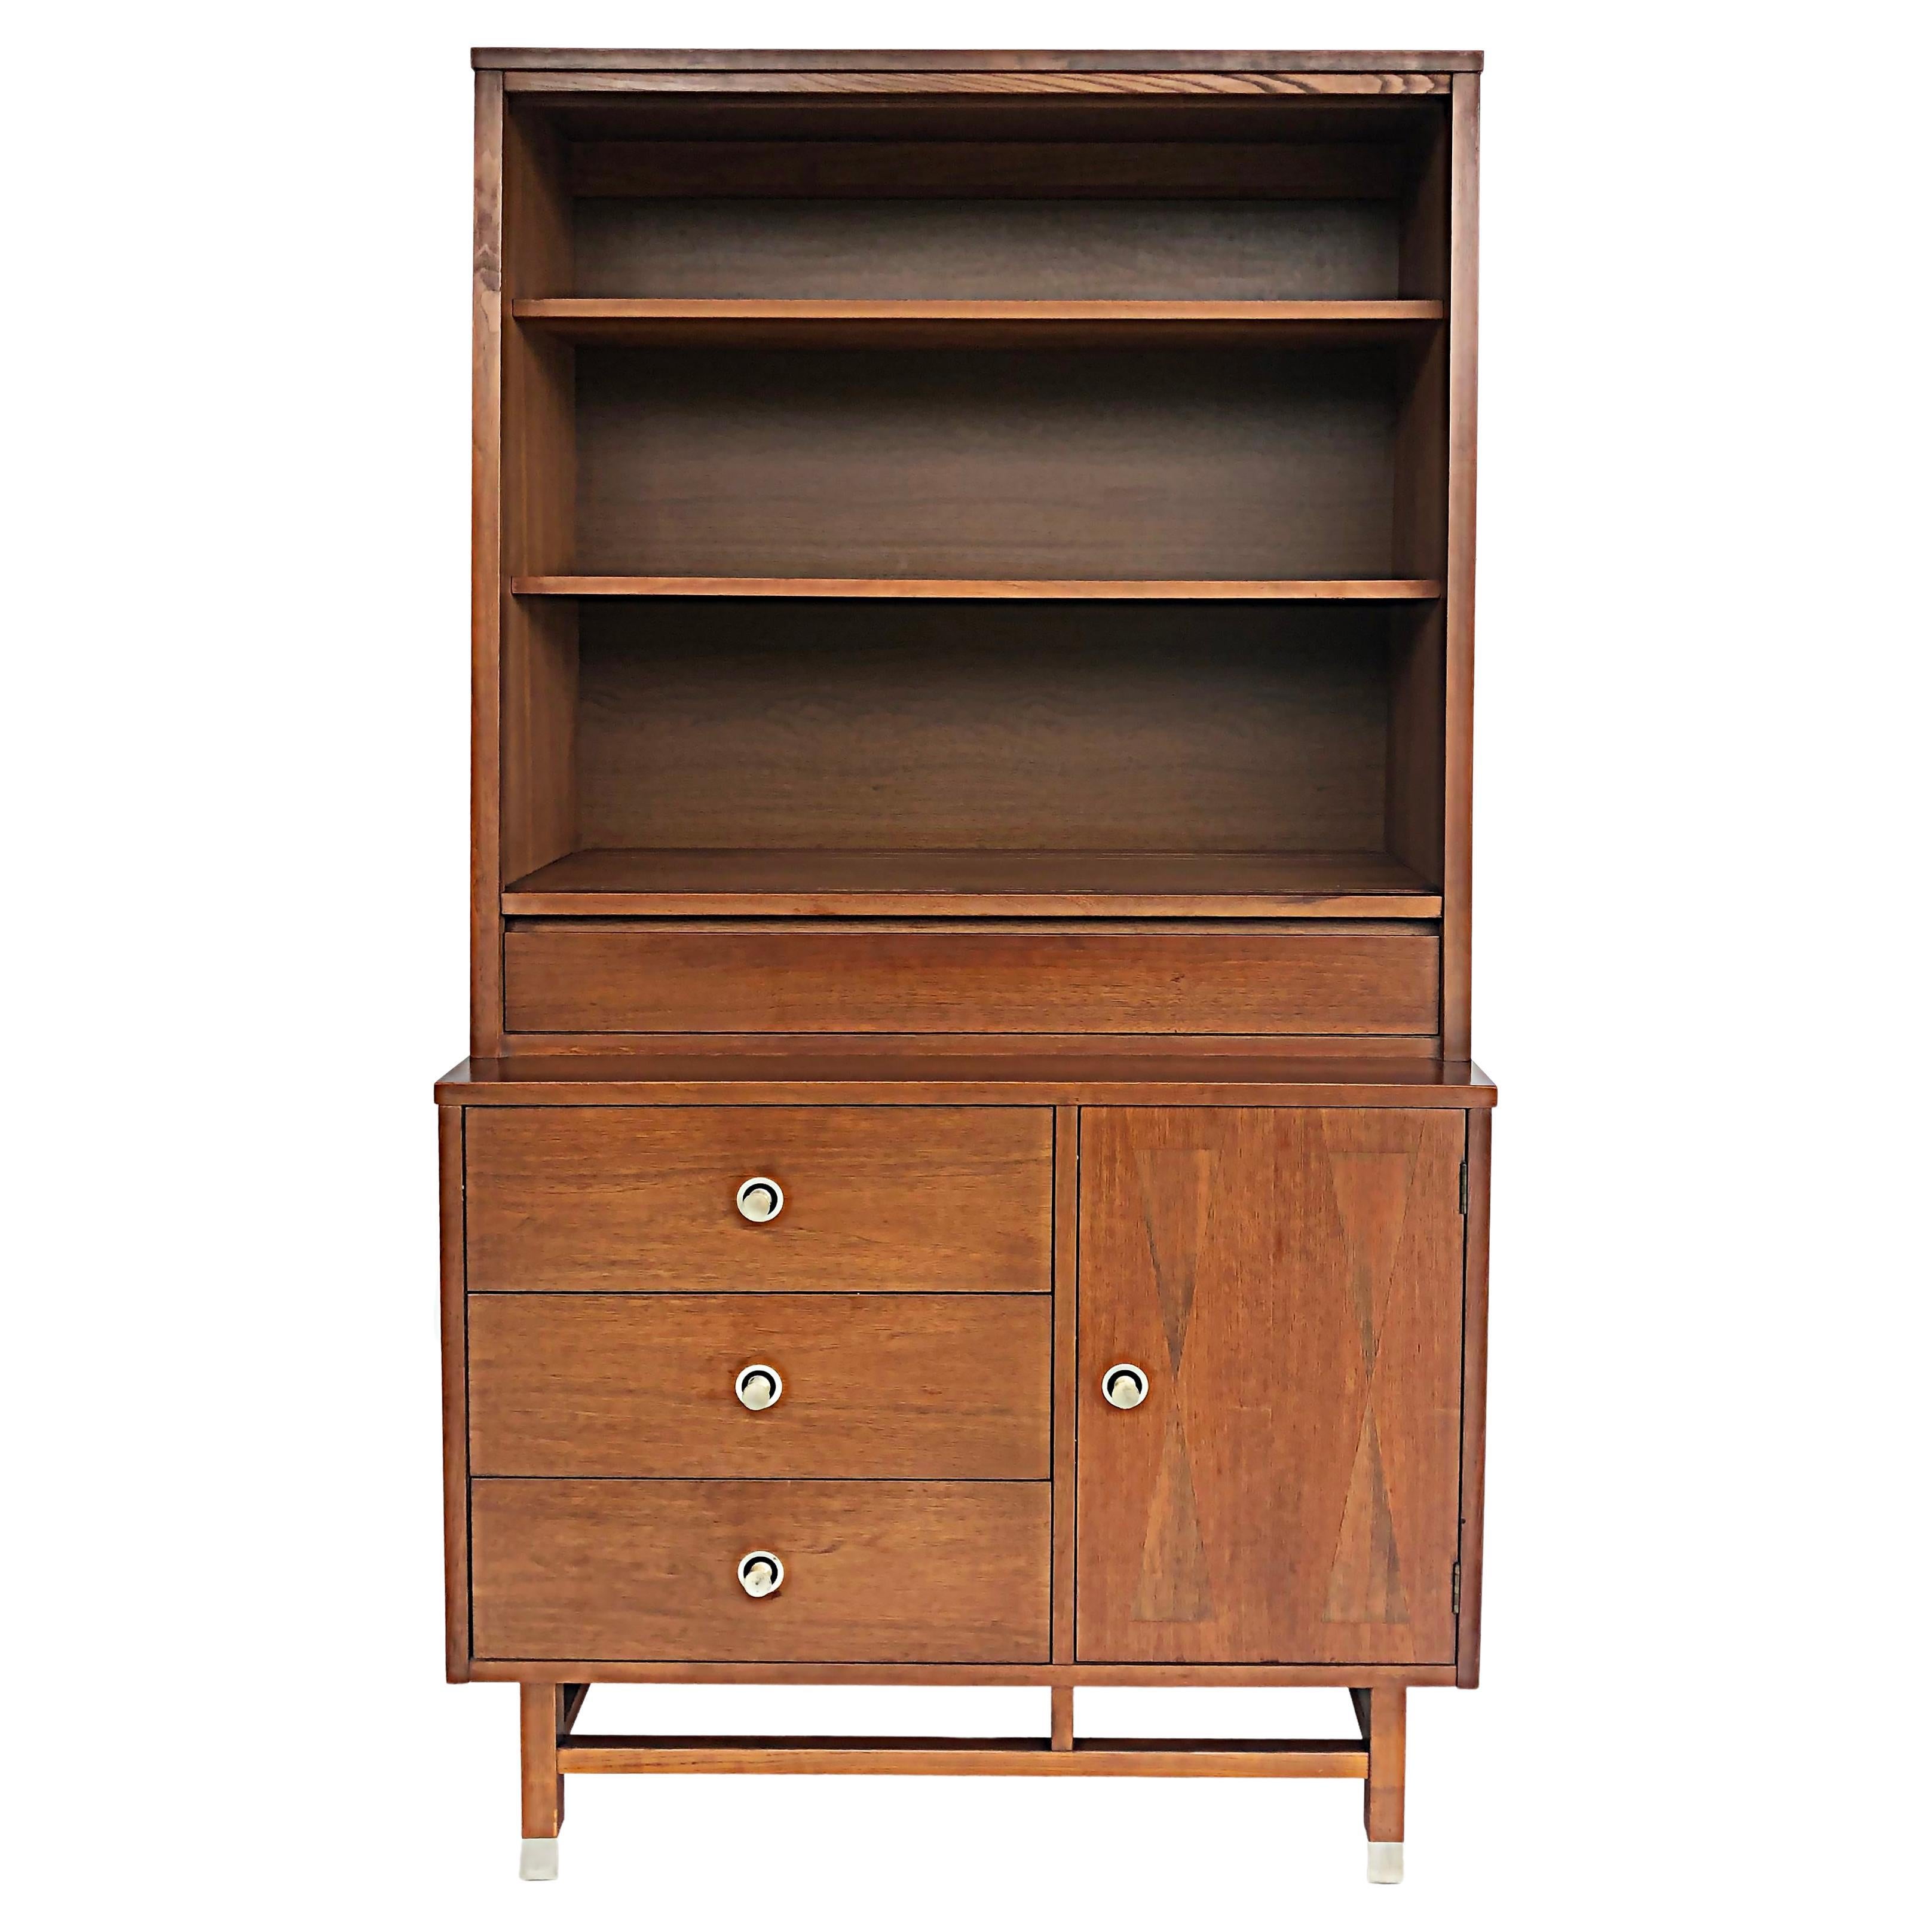 Stanley Furniture Mid-Century Walnut Rosewood China Cabinet by H Paul Browning